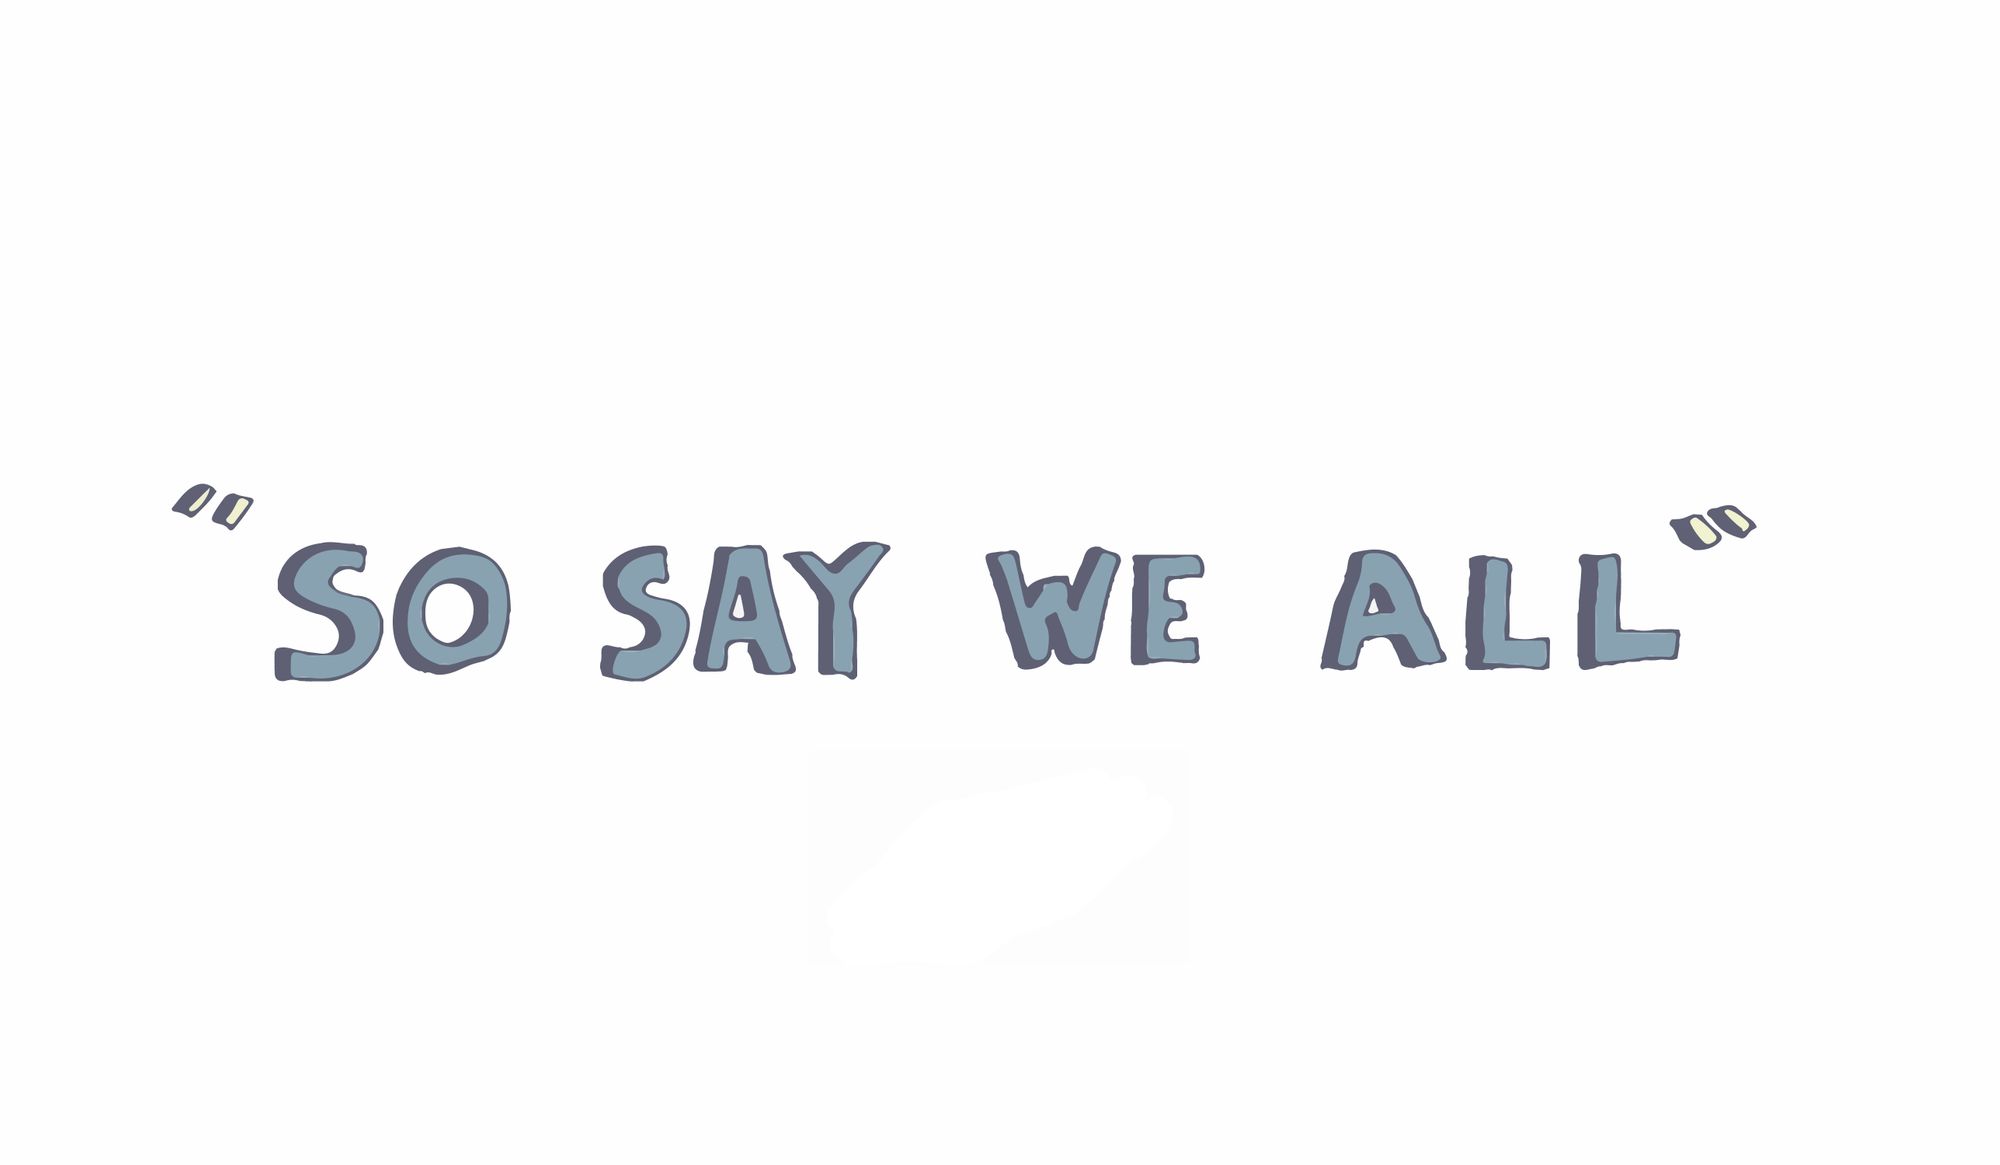 "so say we all"